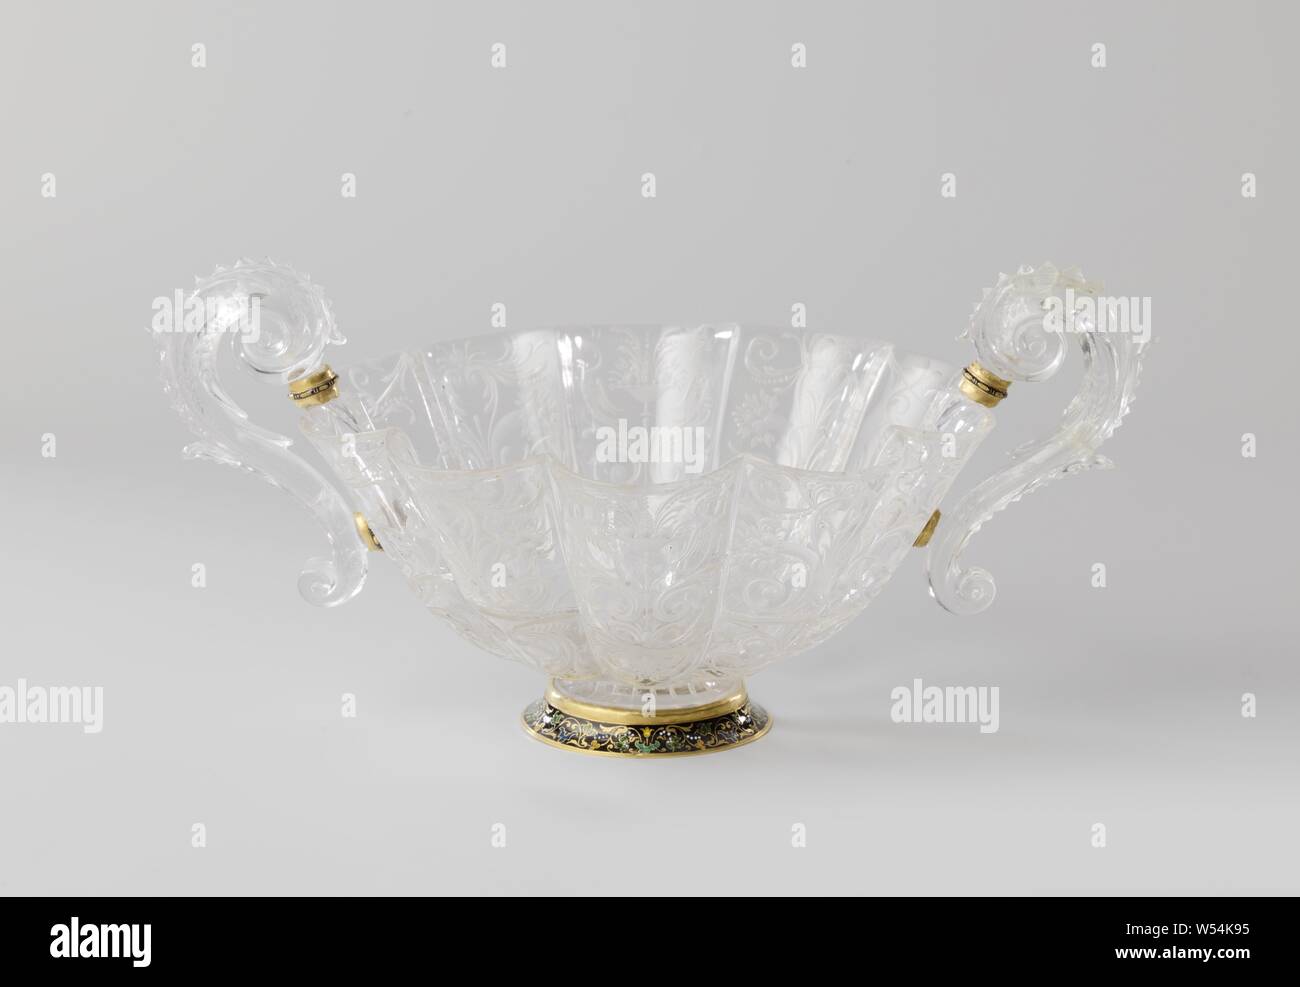 Footed dish Dish, ten-lobed, of rock crystal with a black enameled base of gold. Dish decorated with tendrils, fruit bunches and birds in grinding work. Two S-shaped ears of crystal, Tienlobige, deep bowl of rock crystal with a black enameled golden base. The bowl is decorated with tendrils, fruit bunches and birds in grinding work. Two S-shaped crystal ears., Ornaments, art, anonymous, Milaan, c. 1550 and/or c. 1650, gold (metal), h 14.5 cm × w 30.7 cm × d 21.6 cm Stock Photo